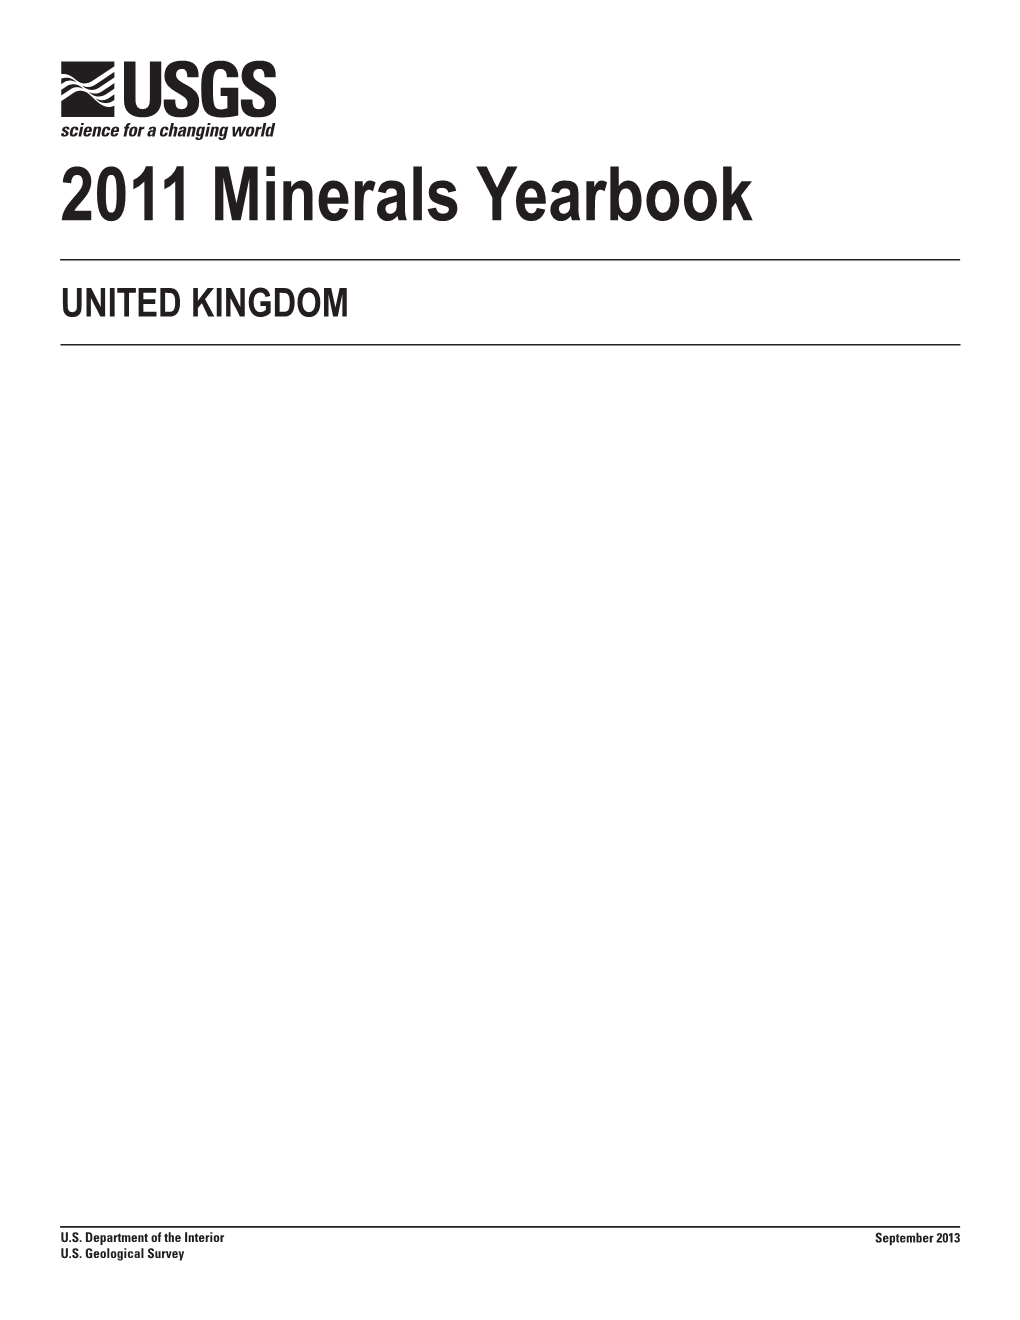 The Mineral Industry of United Kingdom in 2011